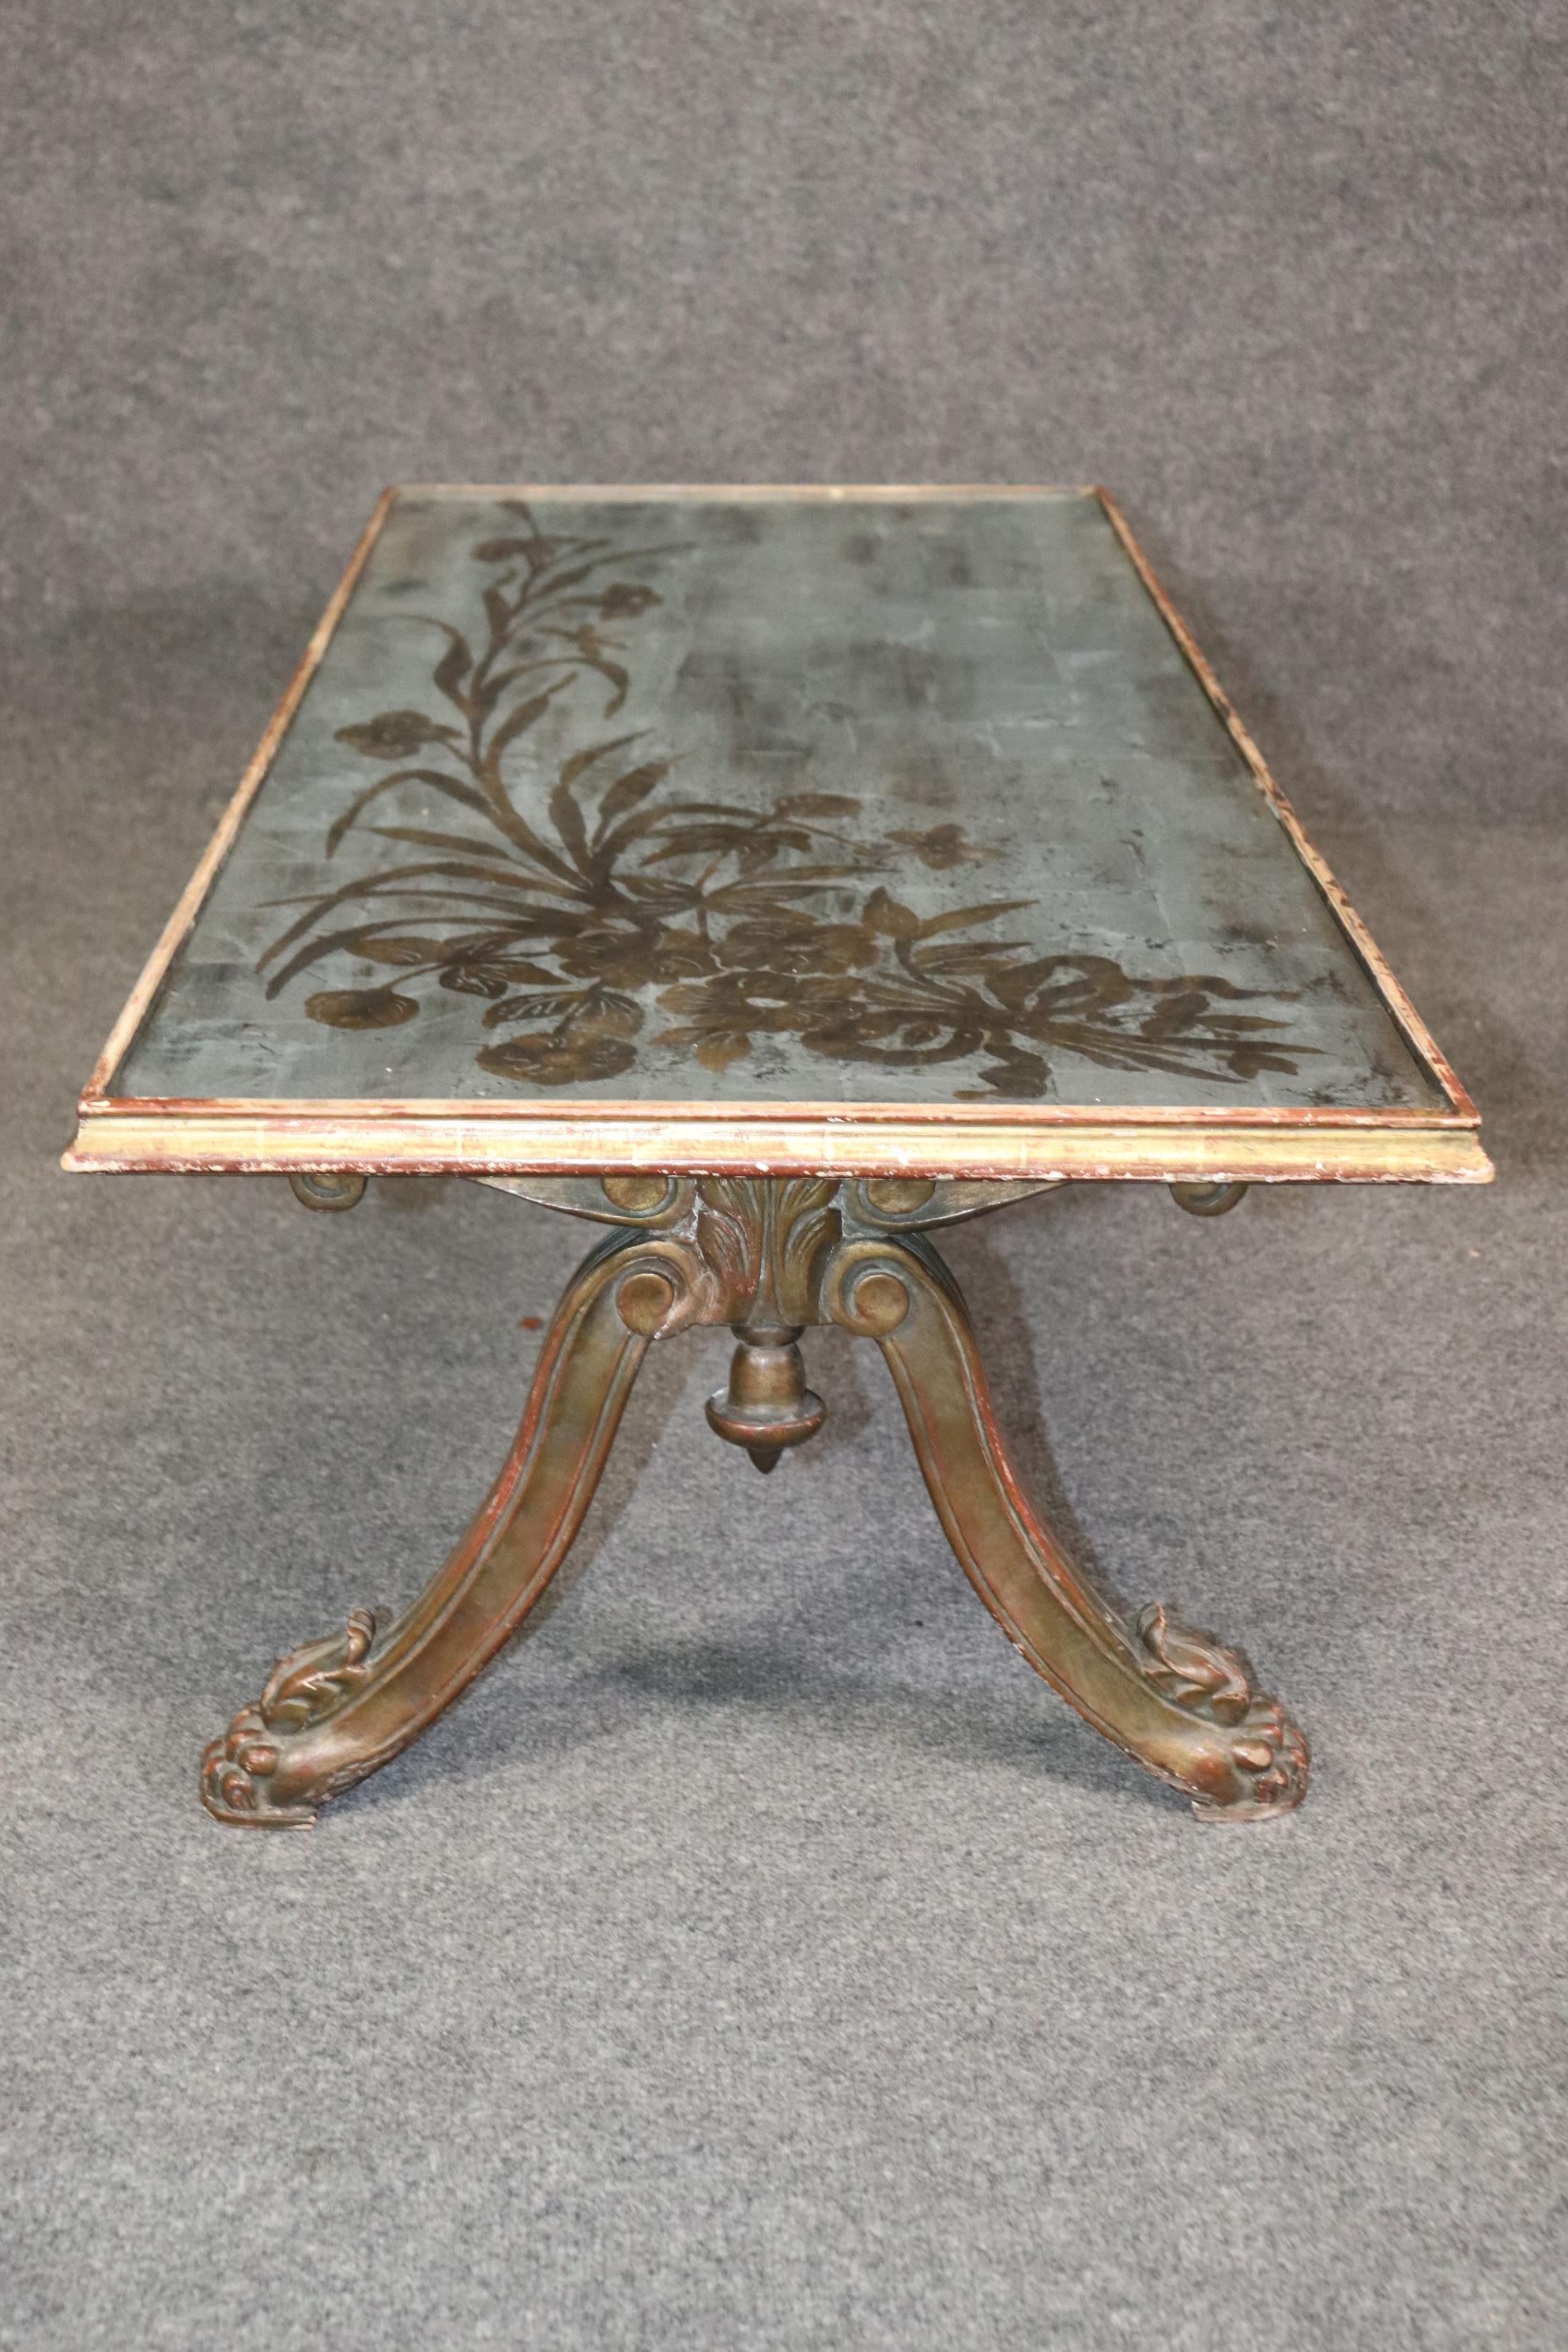 Argentine Antique French Directoire Style Eglomise Gilt Coffee Table Attributed to Jansen For Sale